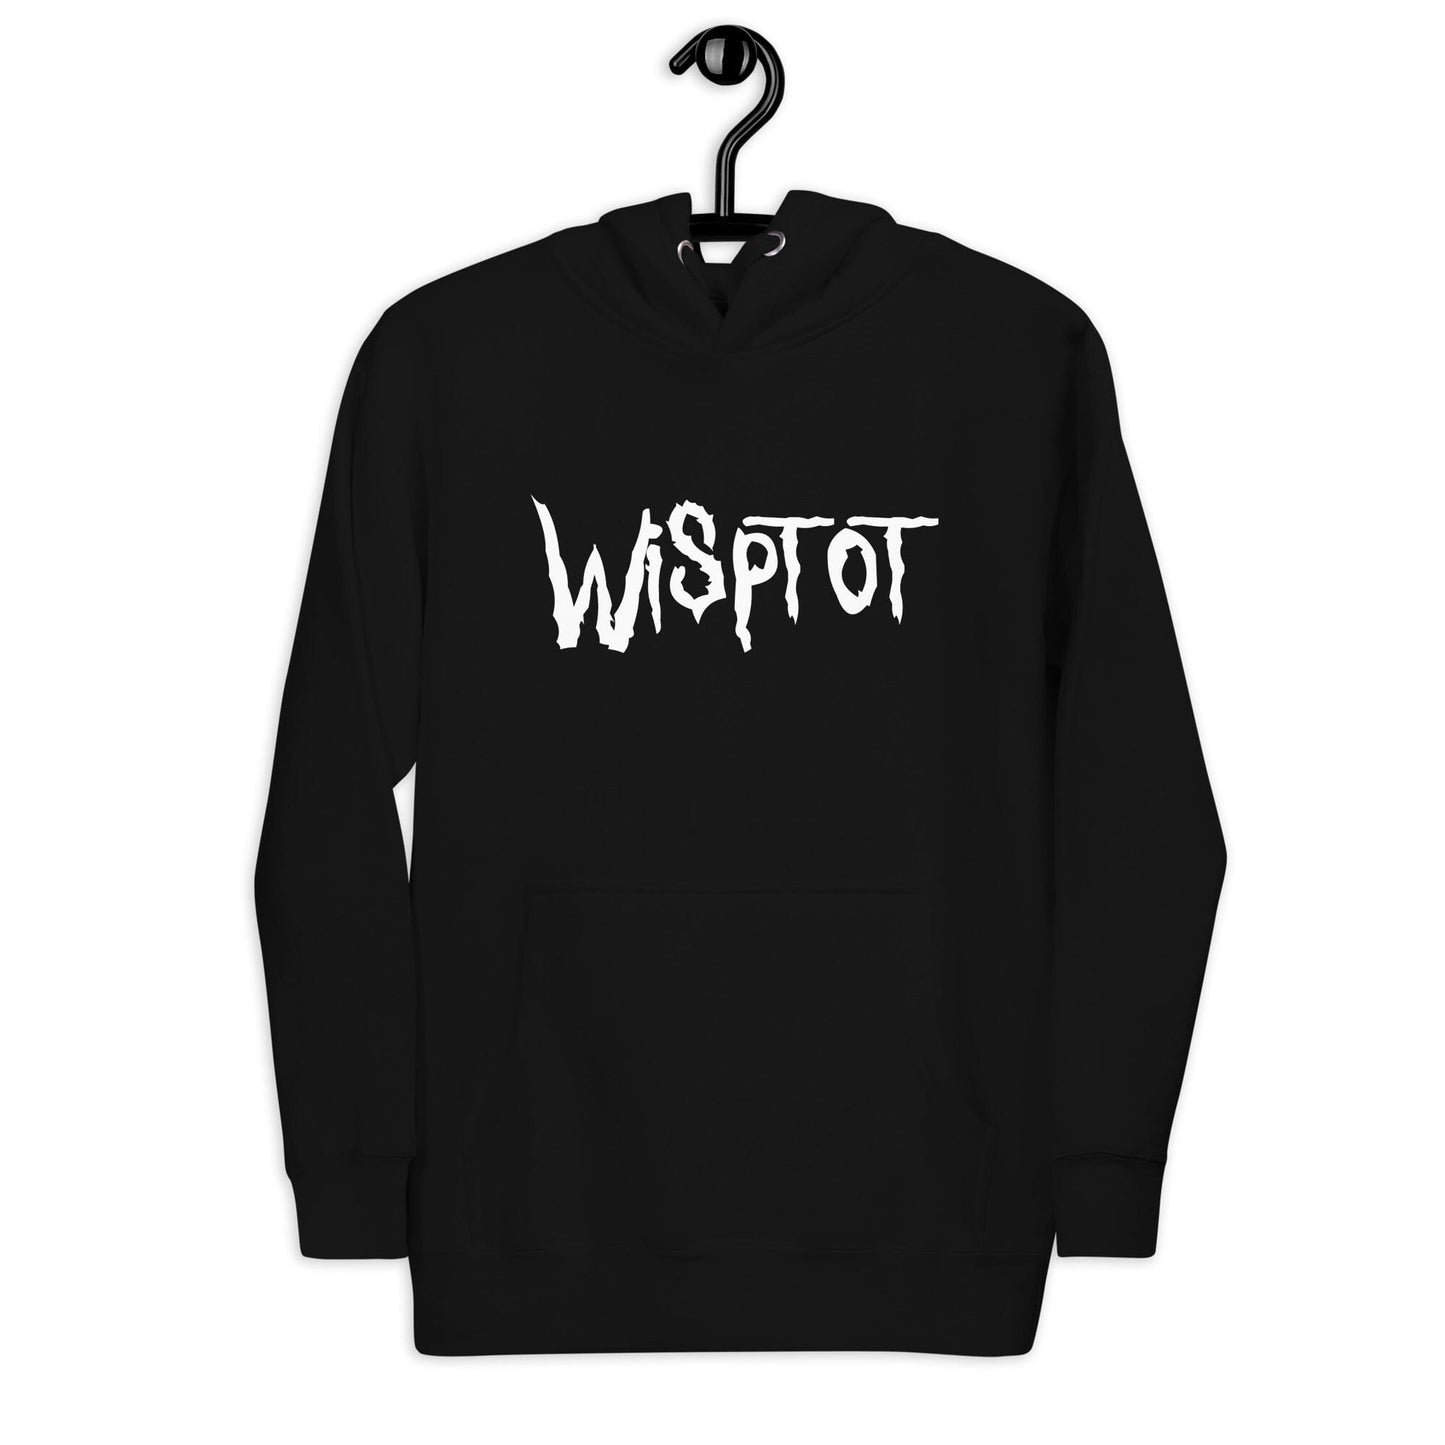 BLACK WispTot Hoodie [Unfoiled] (All net proceeds go to equally to Kitty CrusAIDe and Rags to Riches Animal Rescue) JoyousJoyfulJoyness S 